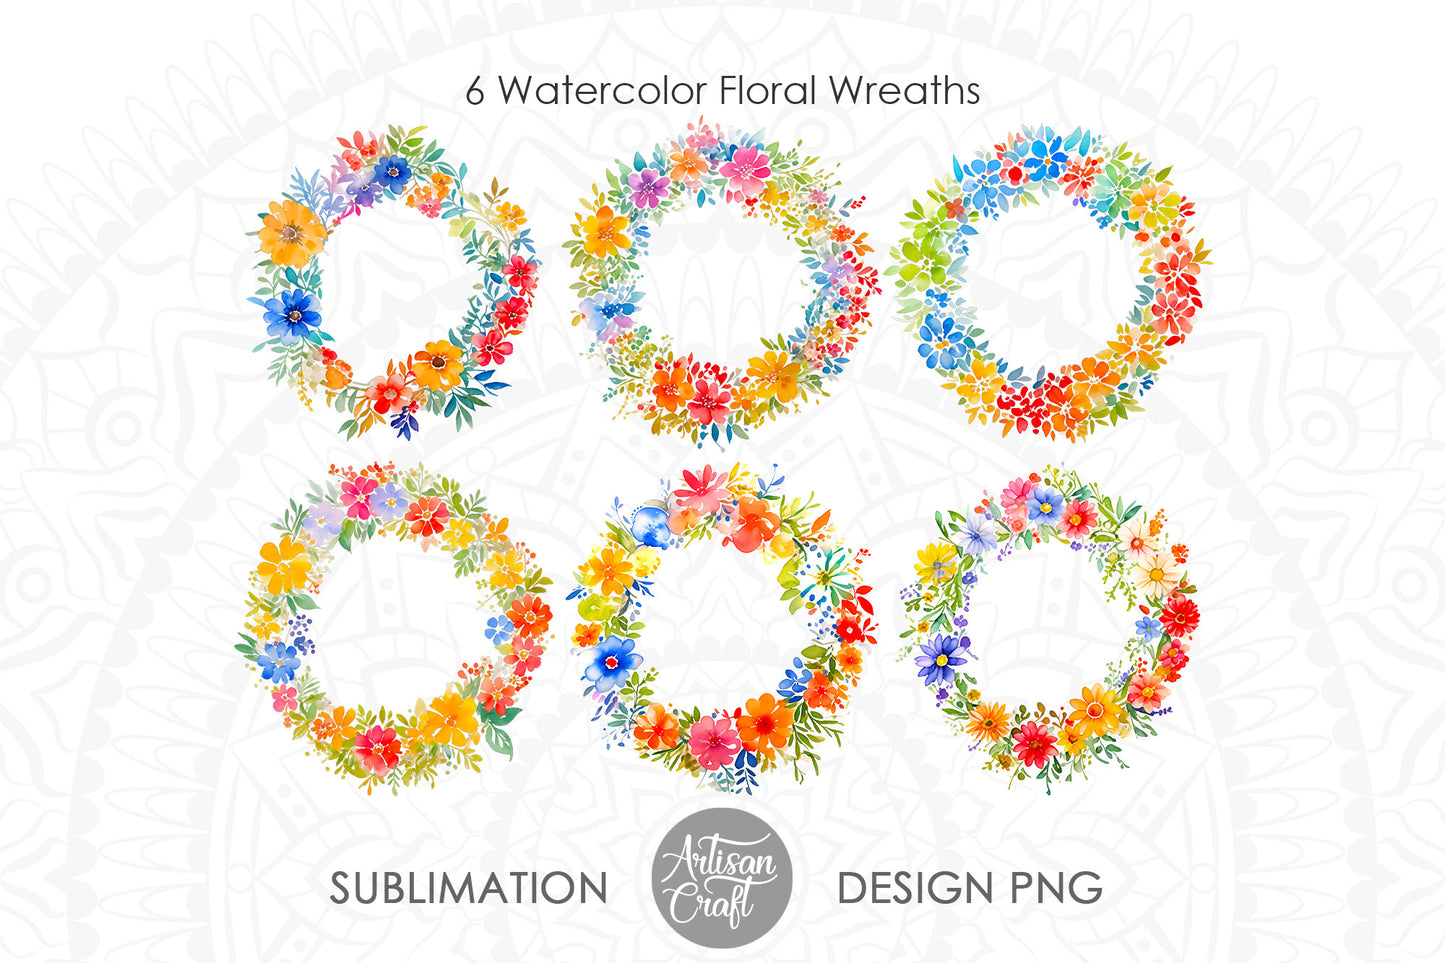 Watercolor floral wreath, PNG files, clipart